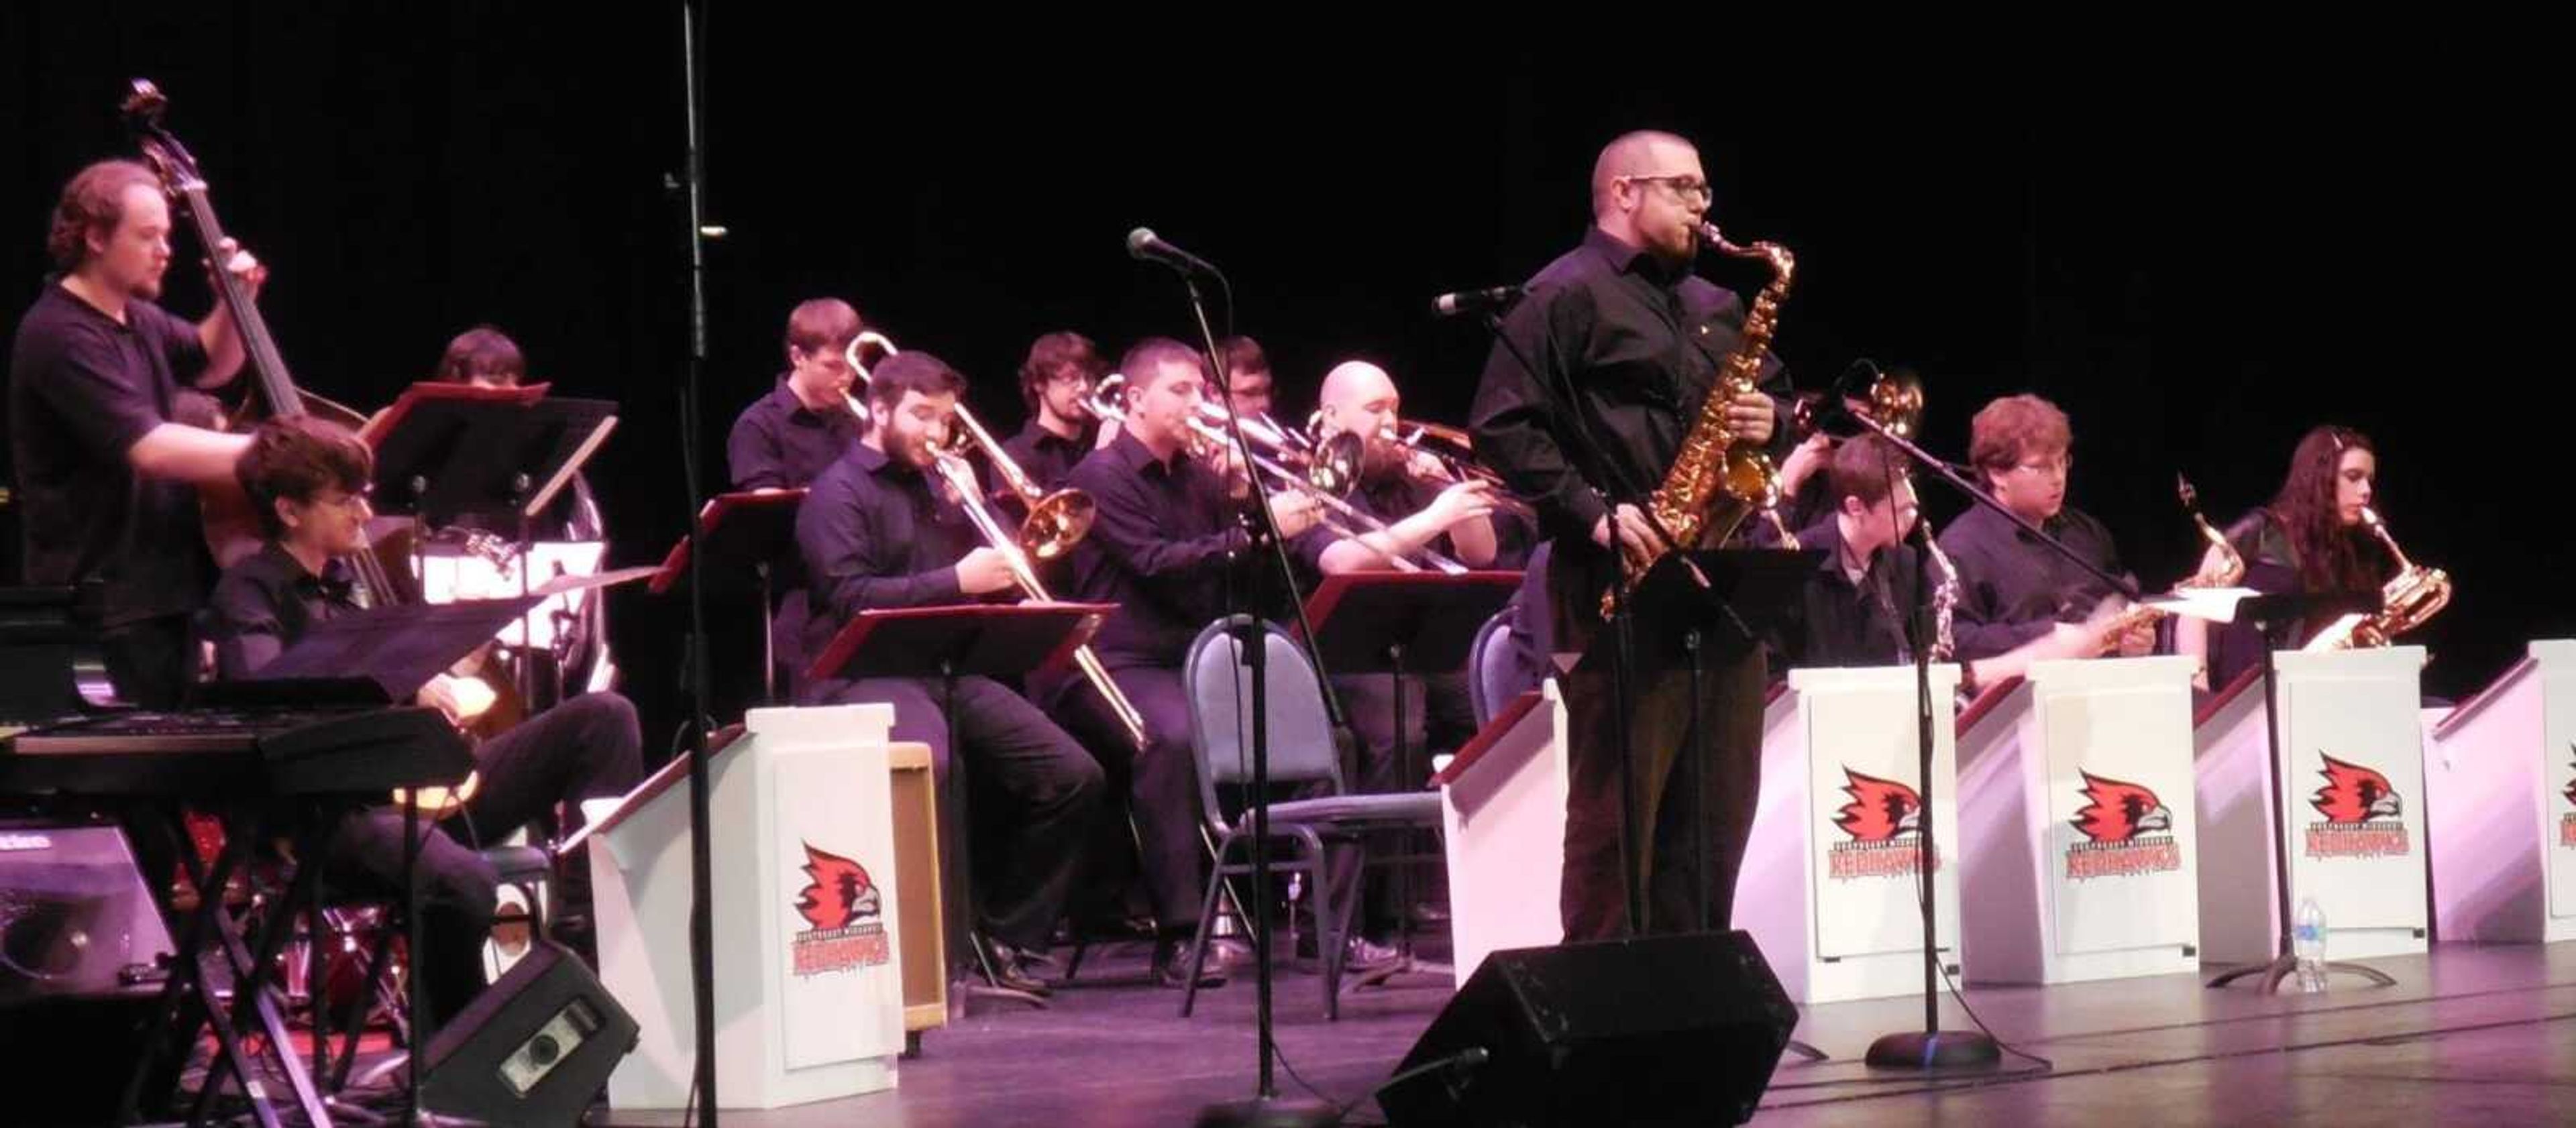 500 students to participate in jazz festival at River Campus